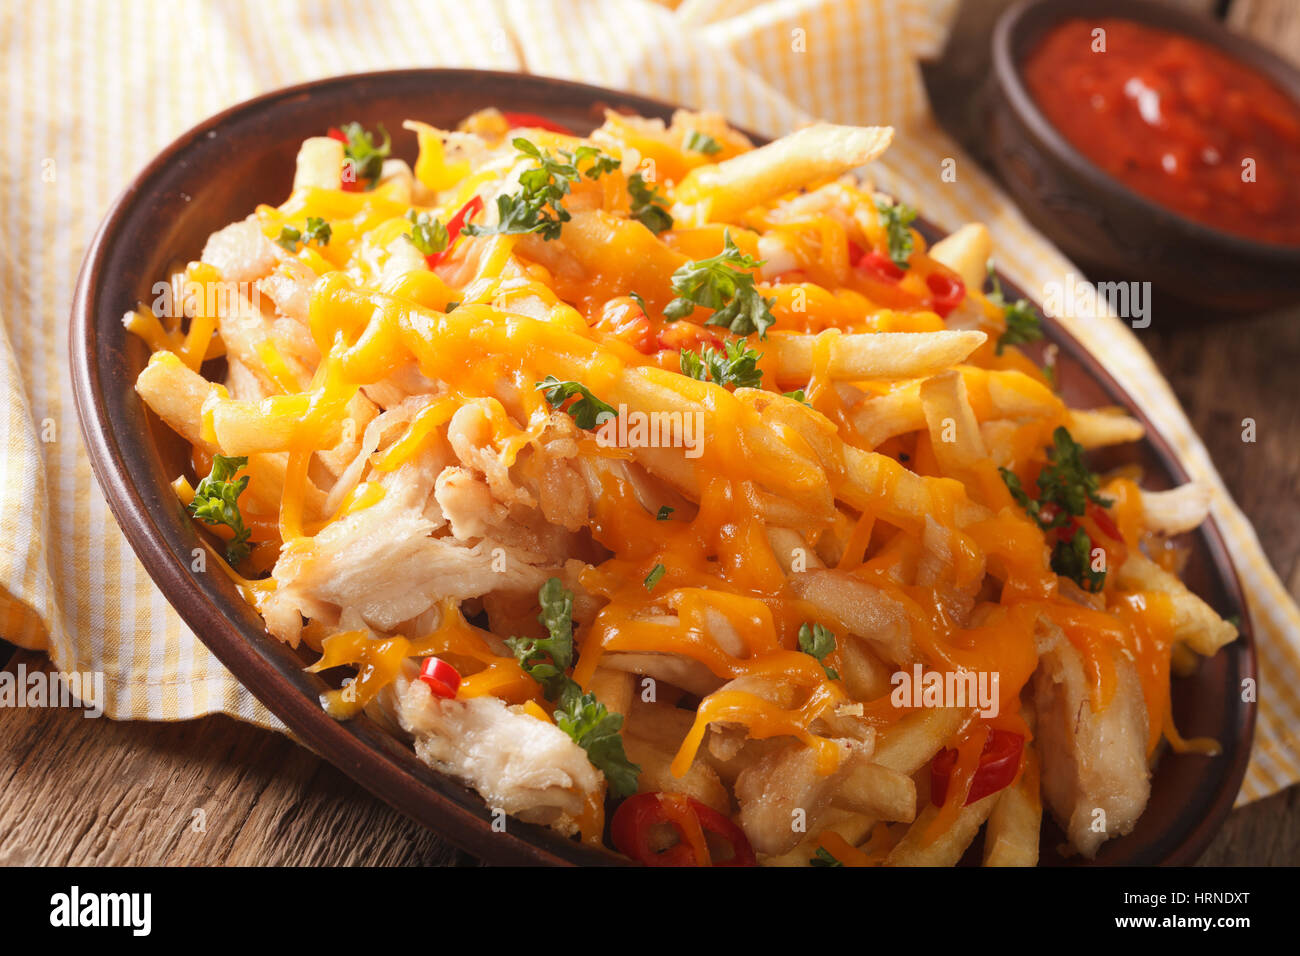 french fries with cheddar cheese, chili and chicken close-up on a plate. horizontal Stock Photo